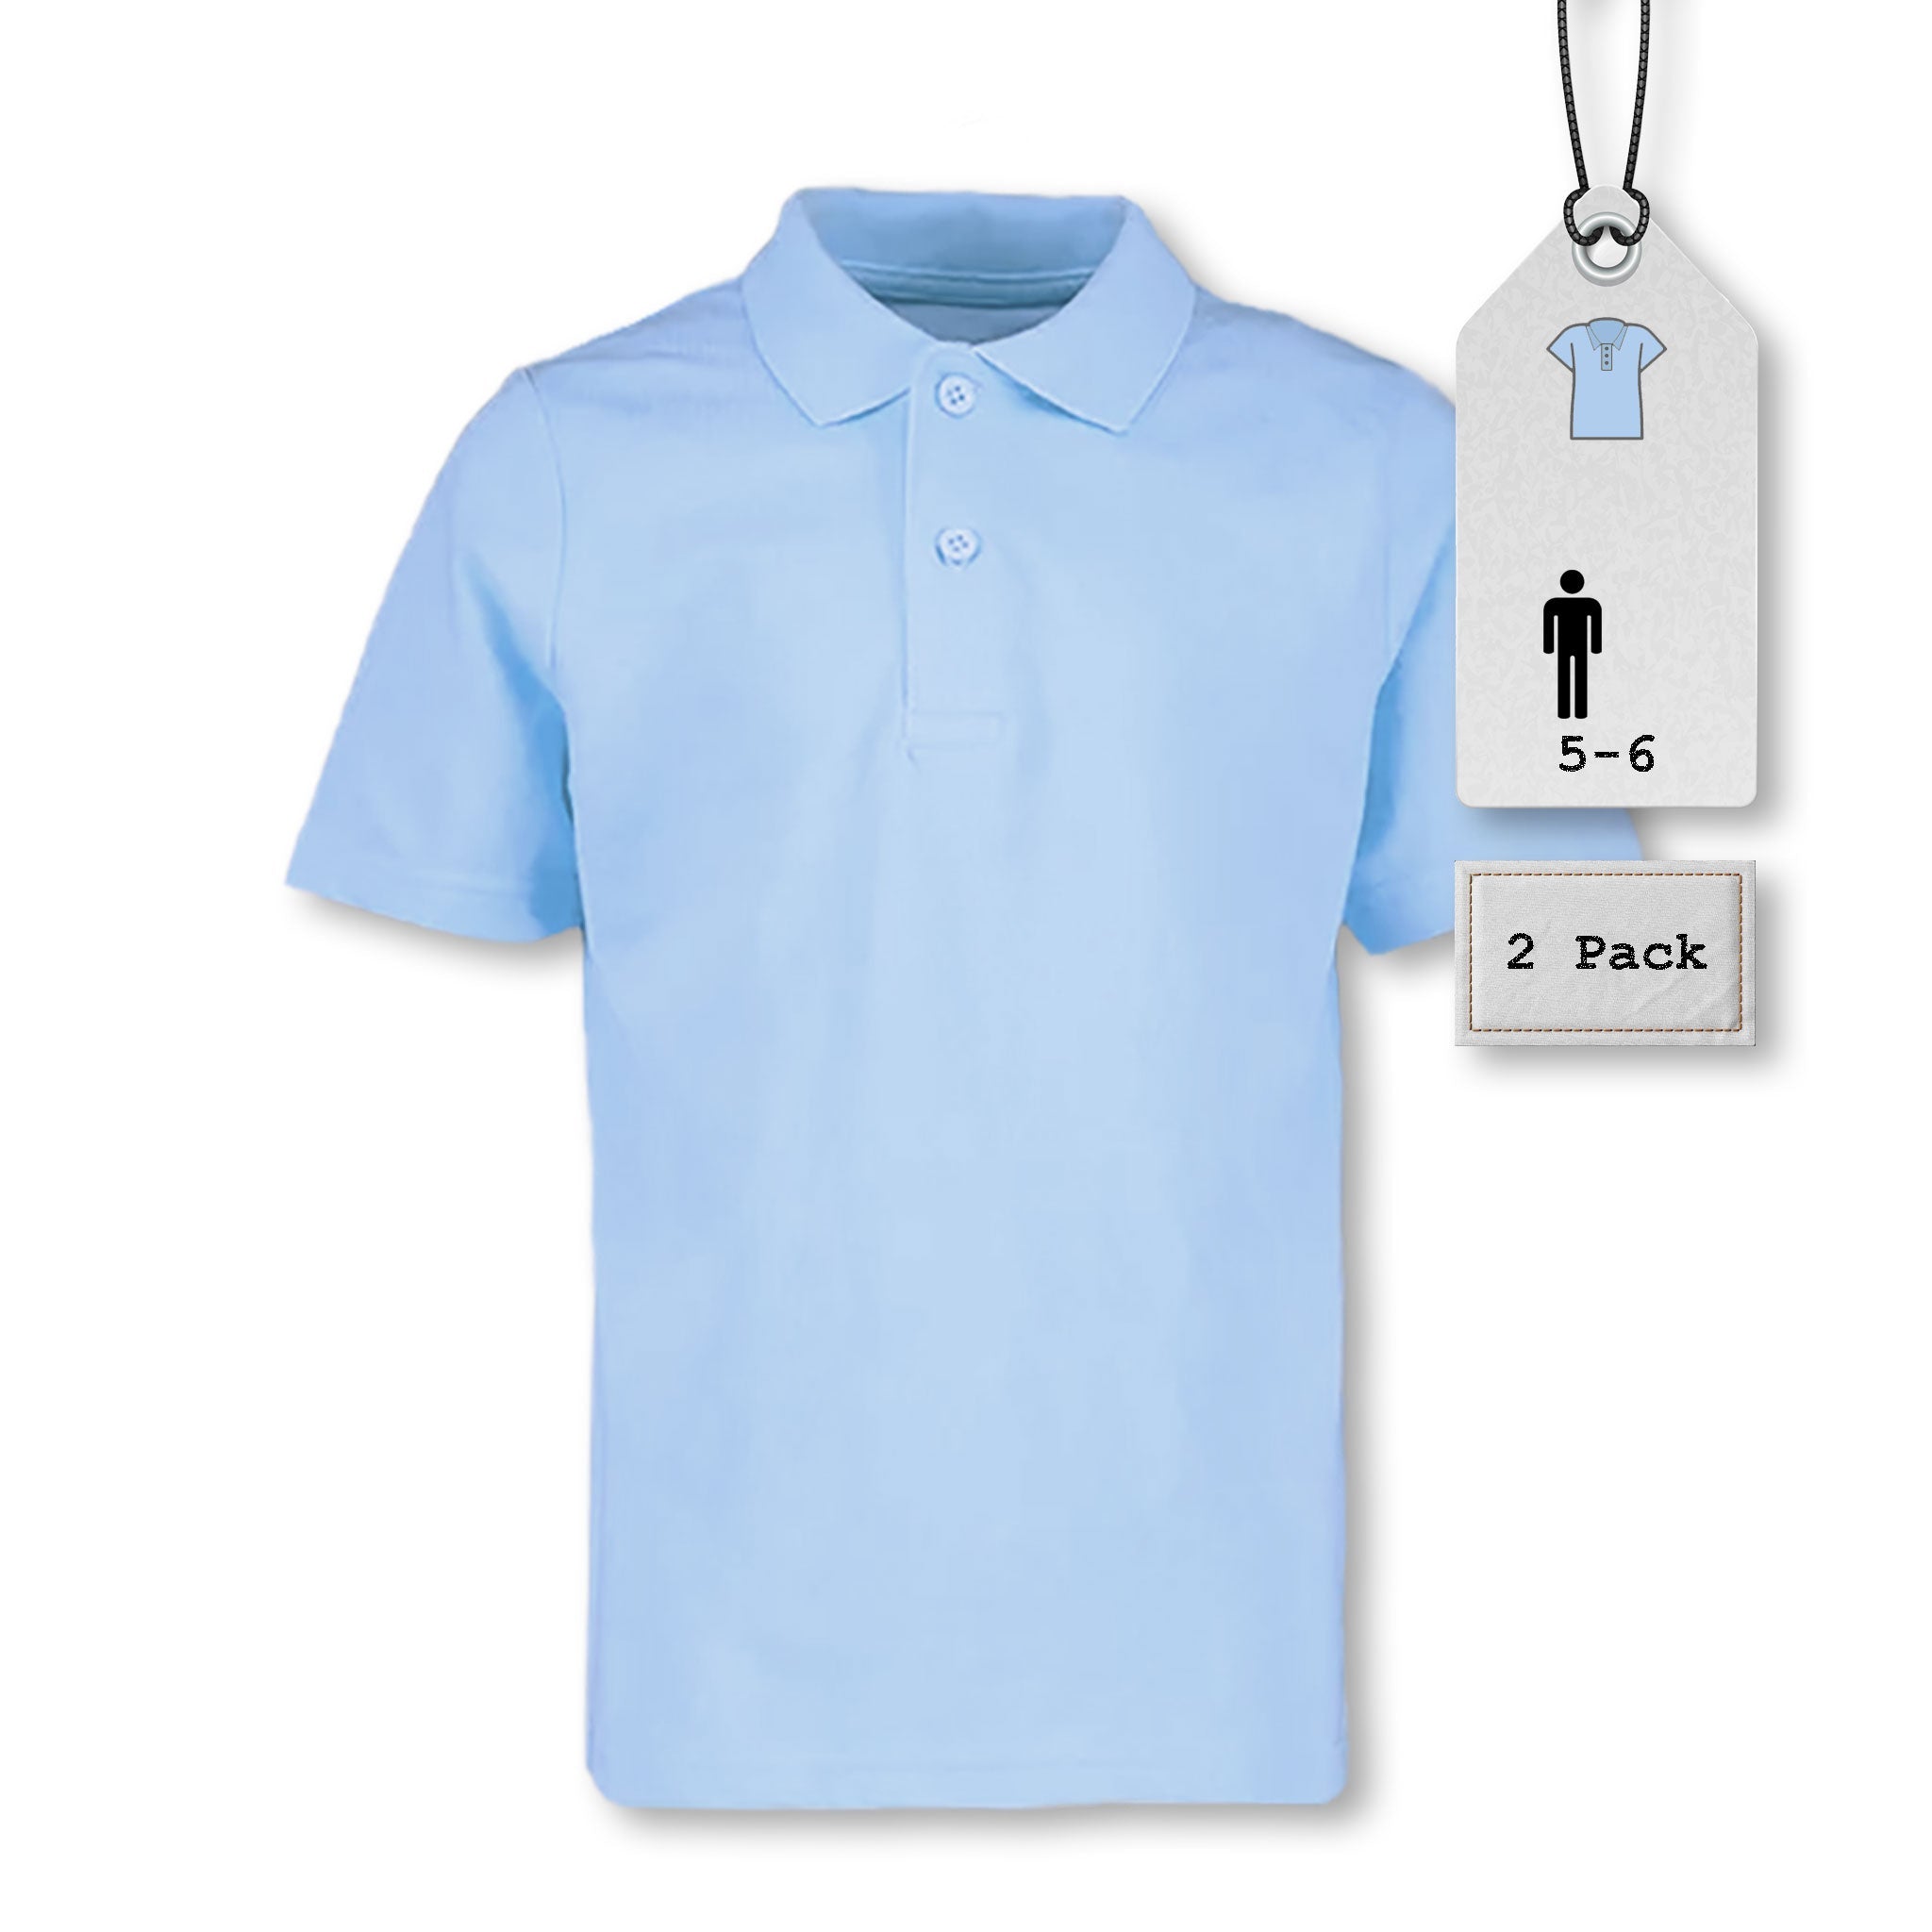 Boys Polo Shirts | Blue | 5-6 Years | 2 Pack